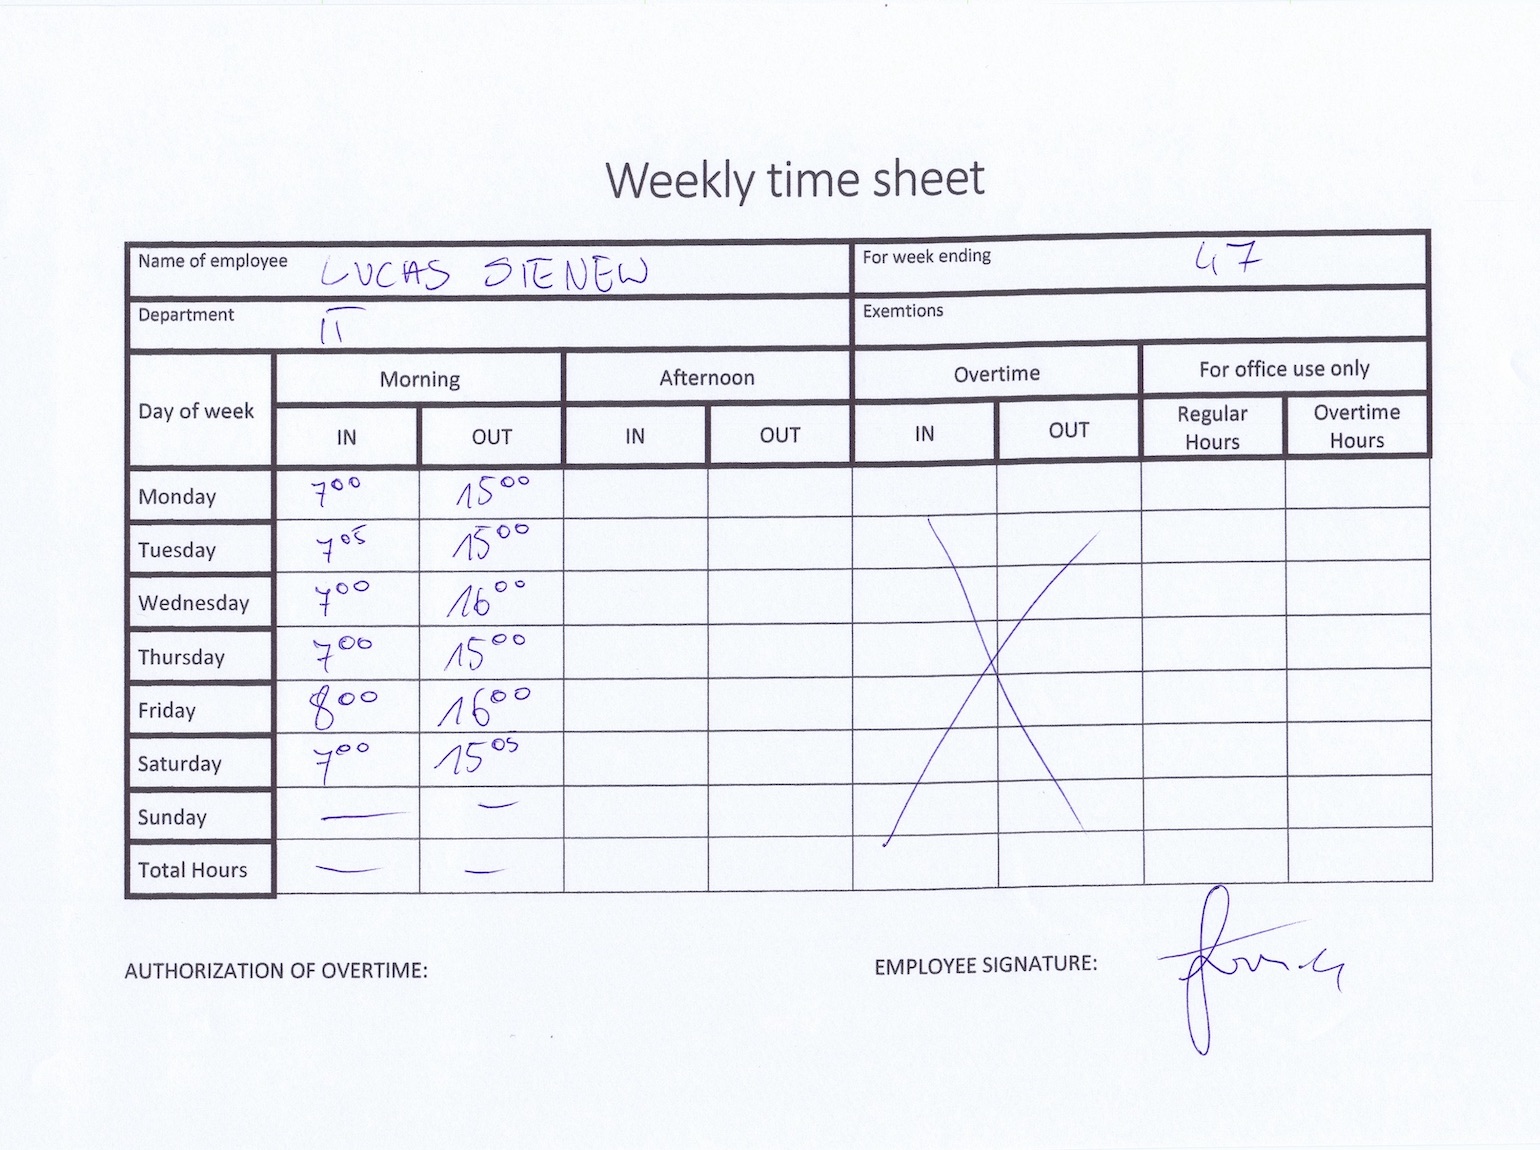 Example of the paper timesheet